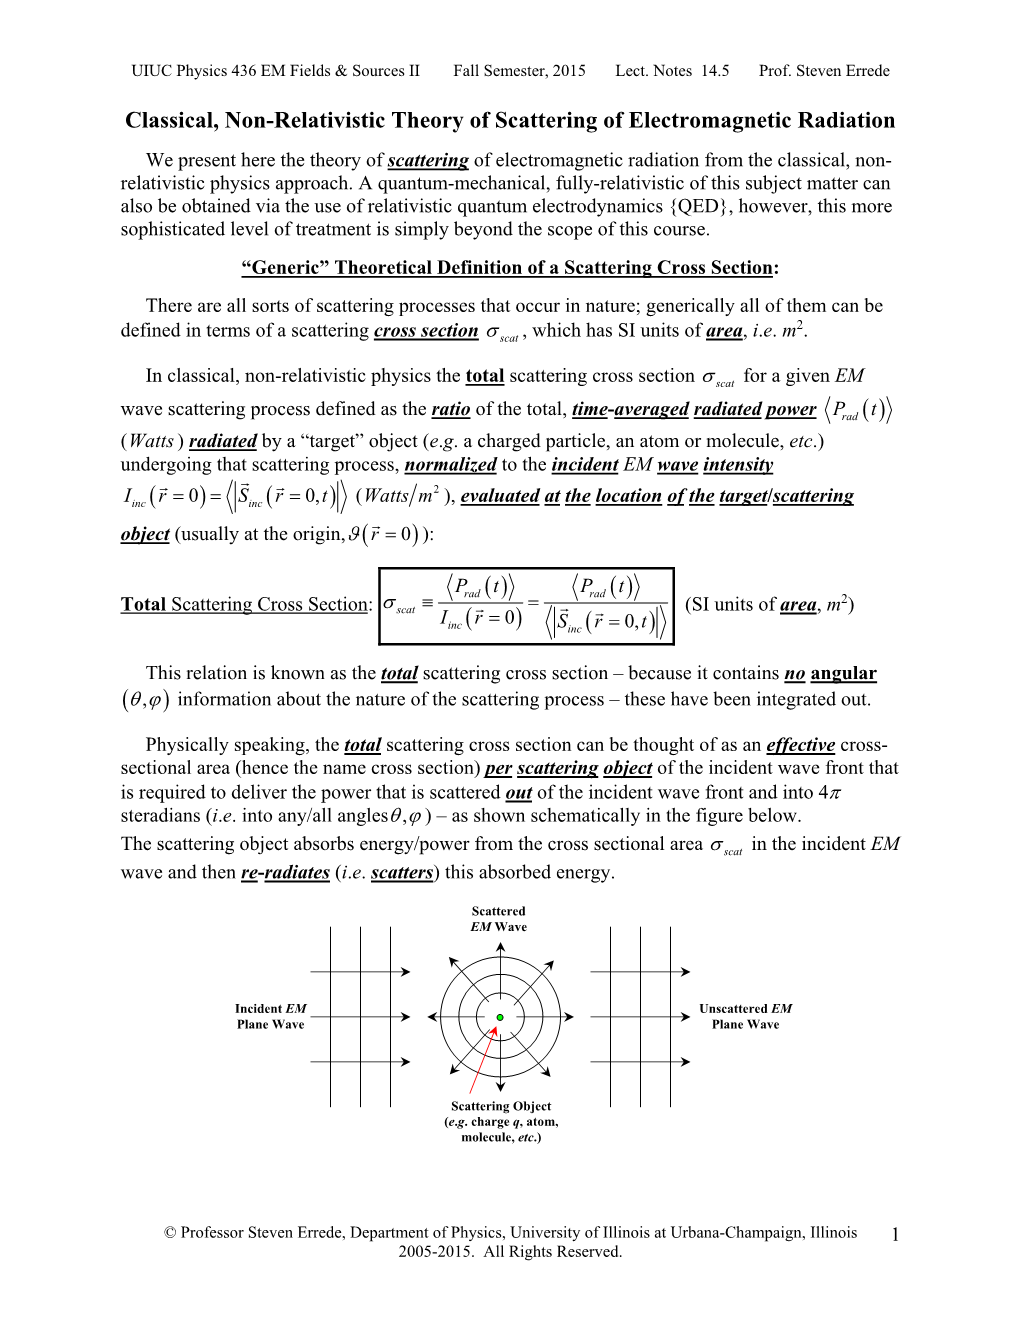 Classical Non-Relativistic Theory of Scattering of EM Radiation